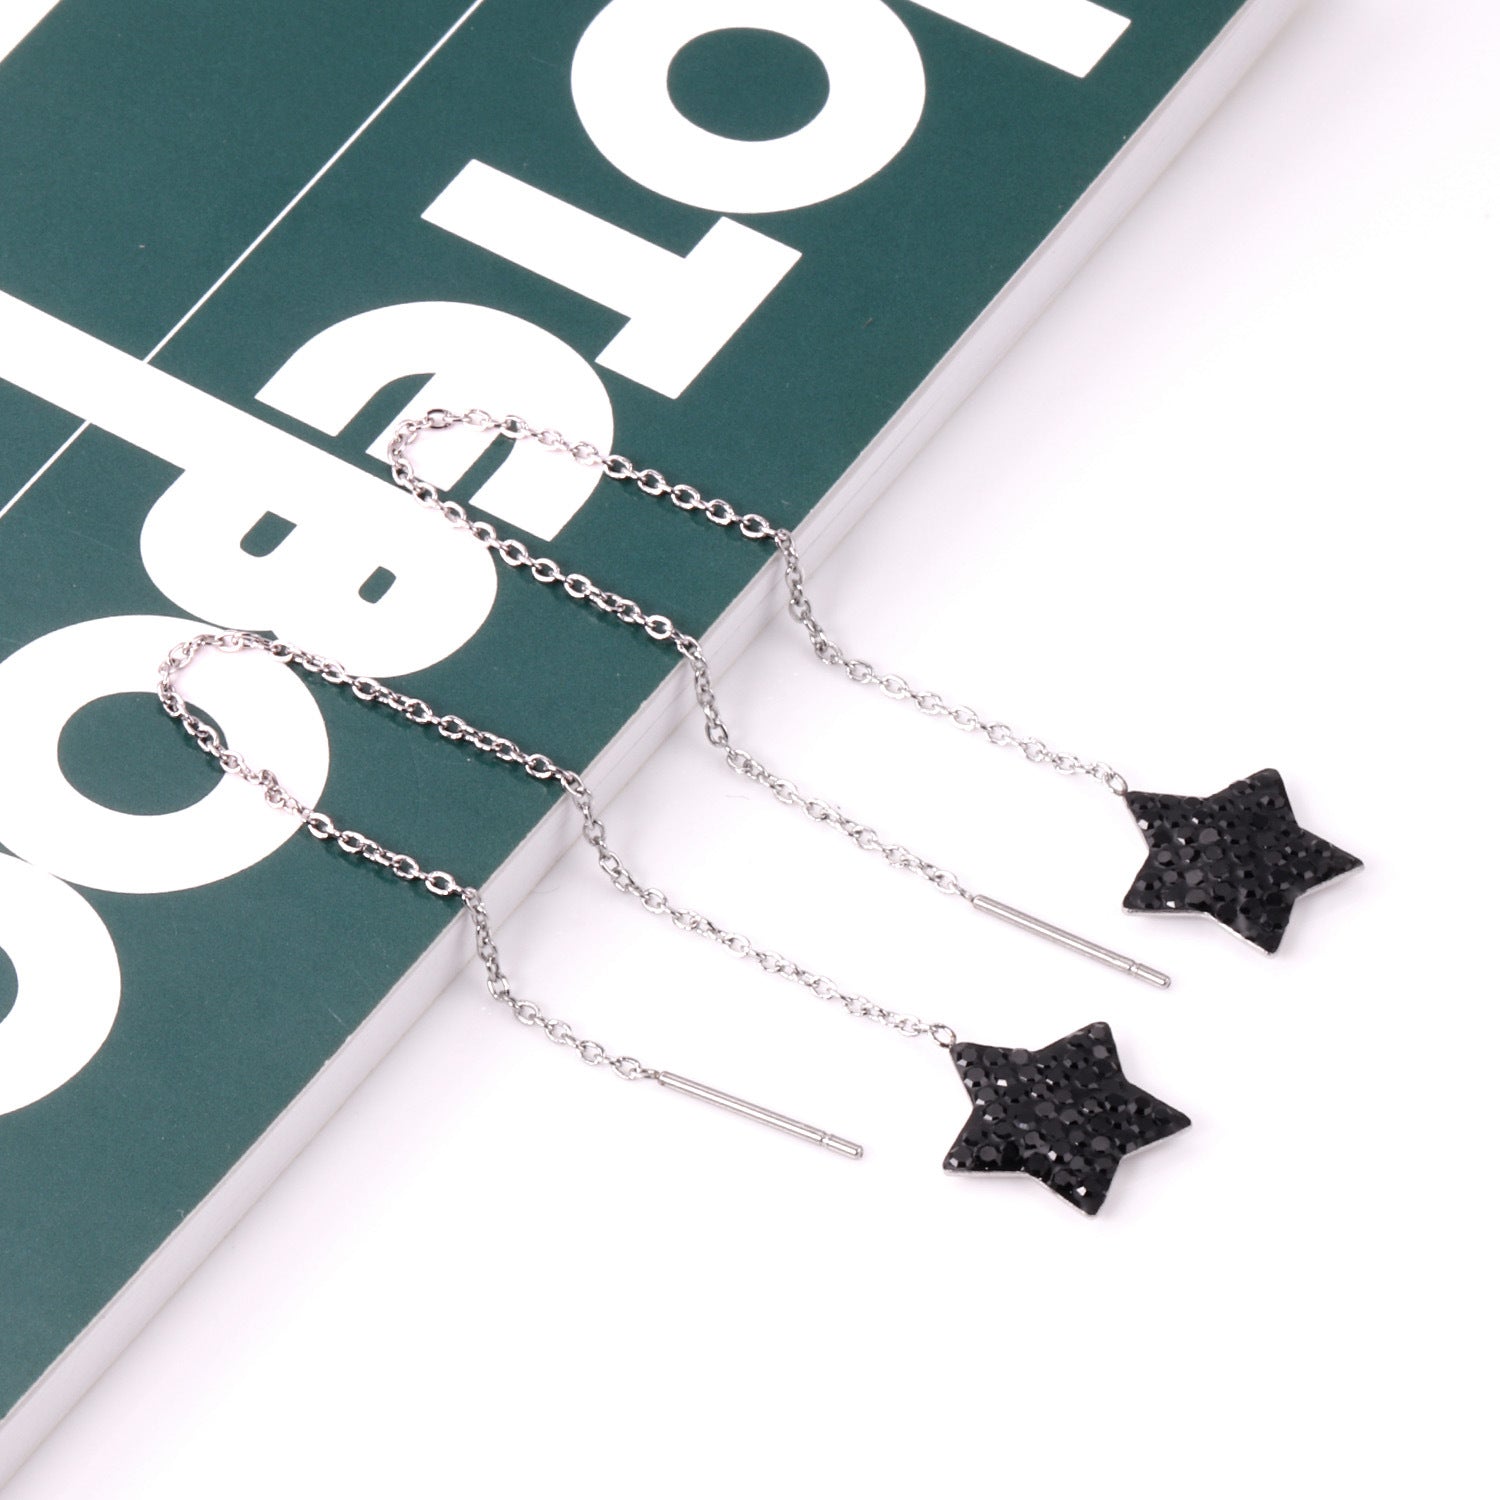 Black Cubic Zirconia & Silver-Plated Star Threader Earrings